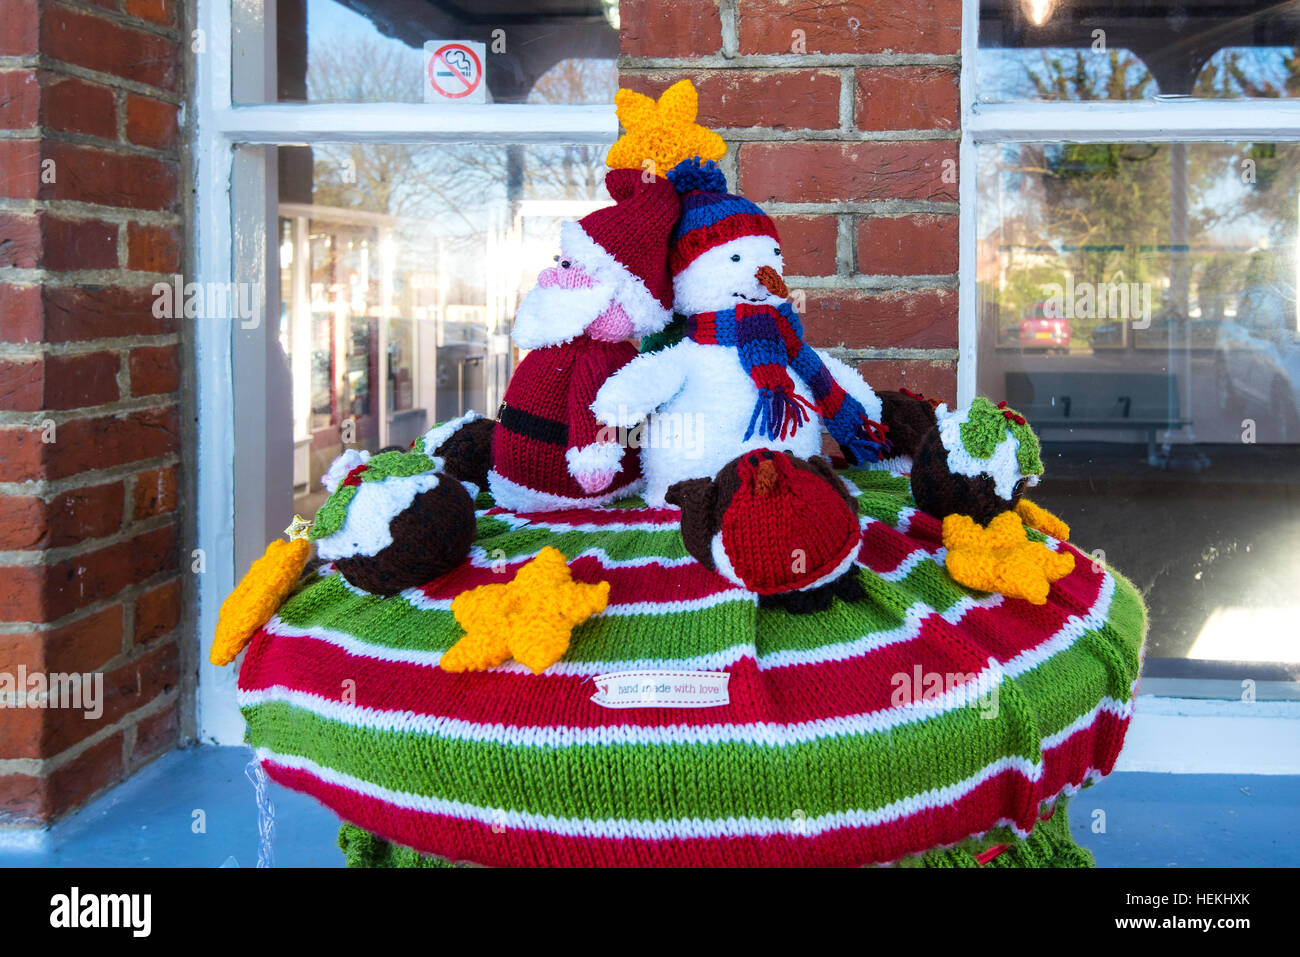 Herne Bay, Kent, UK. 22nd Dec, 2016. Many of the post boxes in Herne Bay, such as this one outside the railway station, have been topped by knitted characters with a Christmas Theme. The toppers are the work of a local knitting group called the 'Herne Bay Cosy Crew' © Paul Martin/Alamy Live News Stock Photo